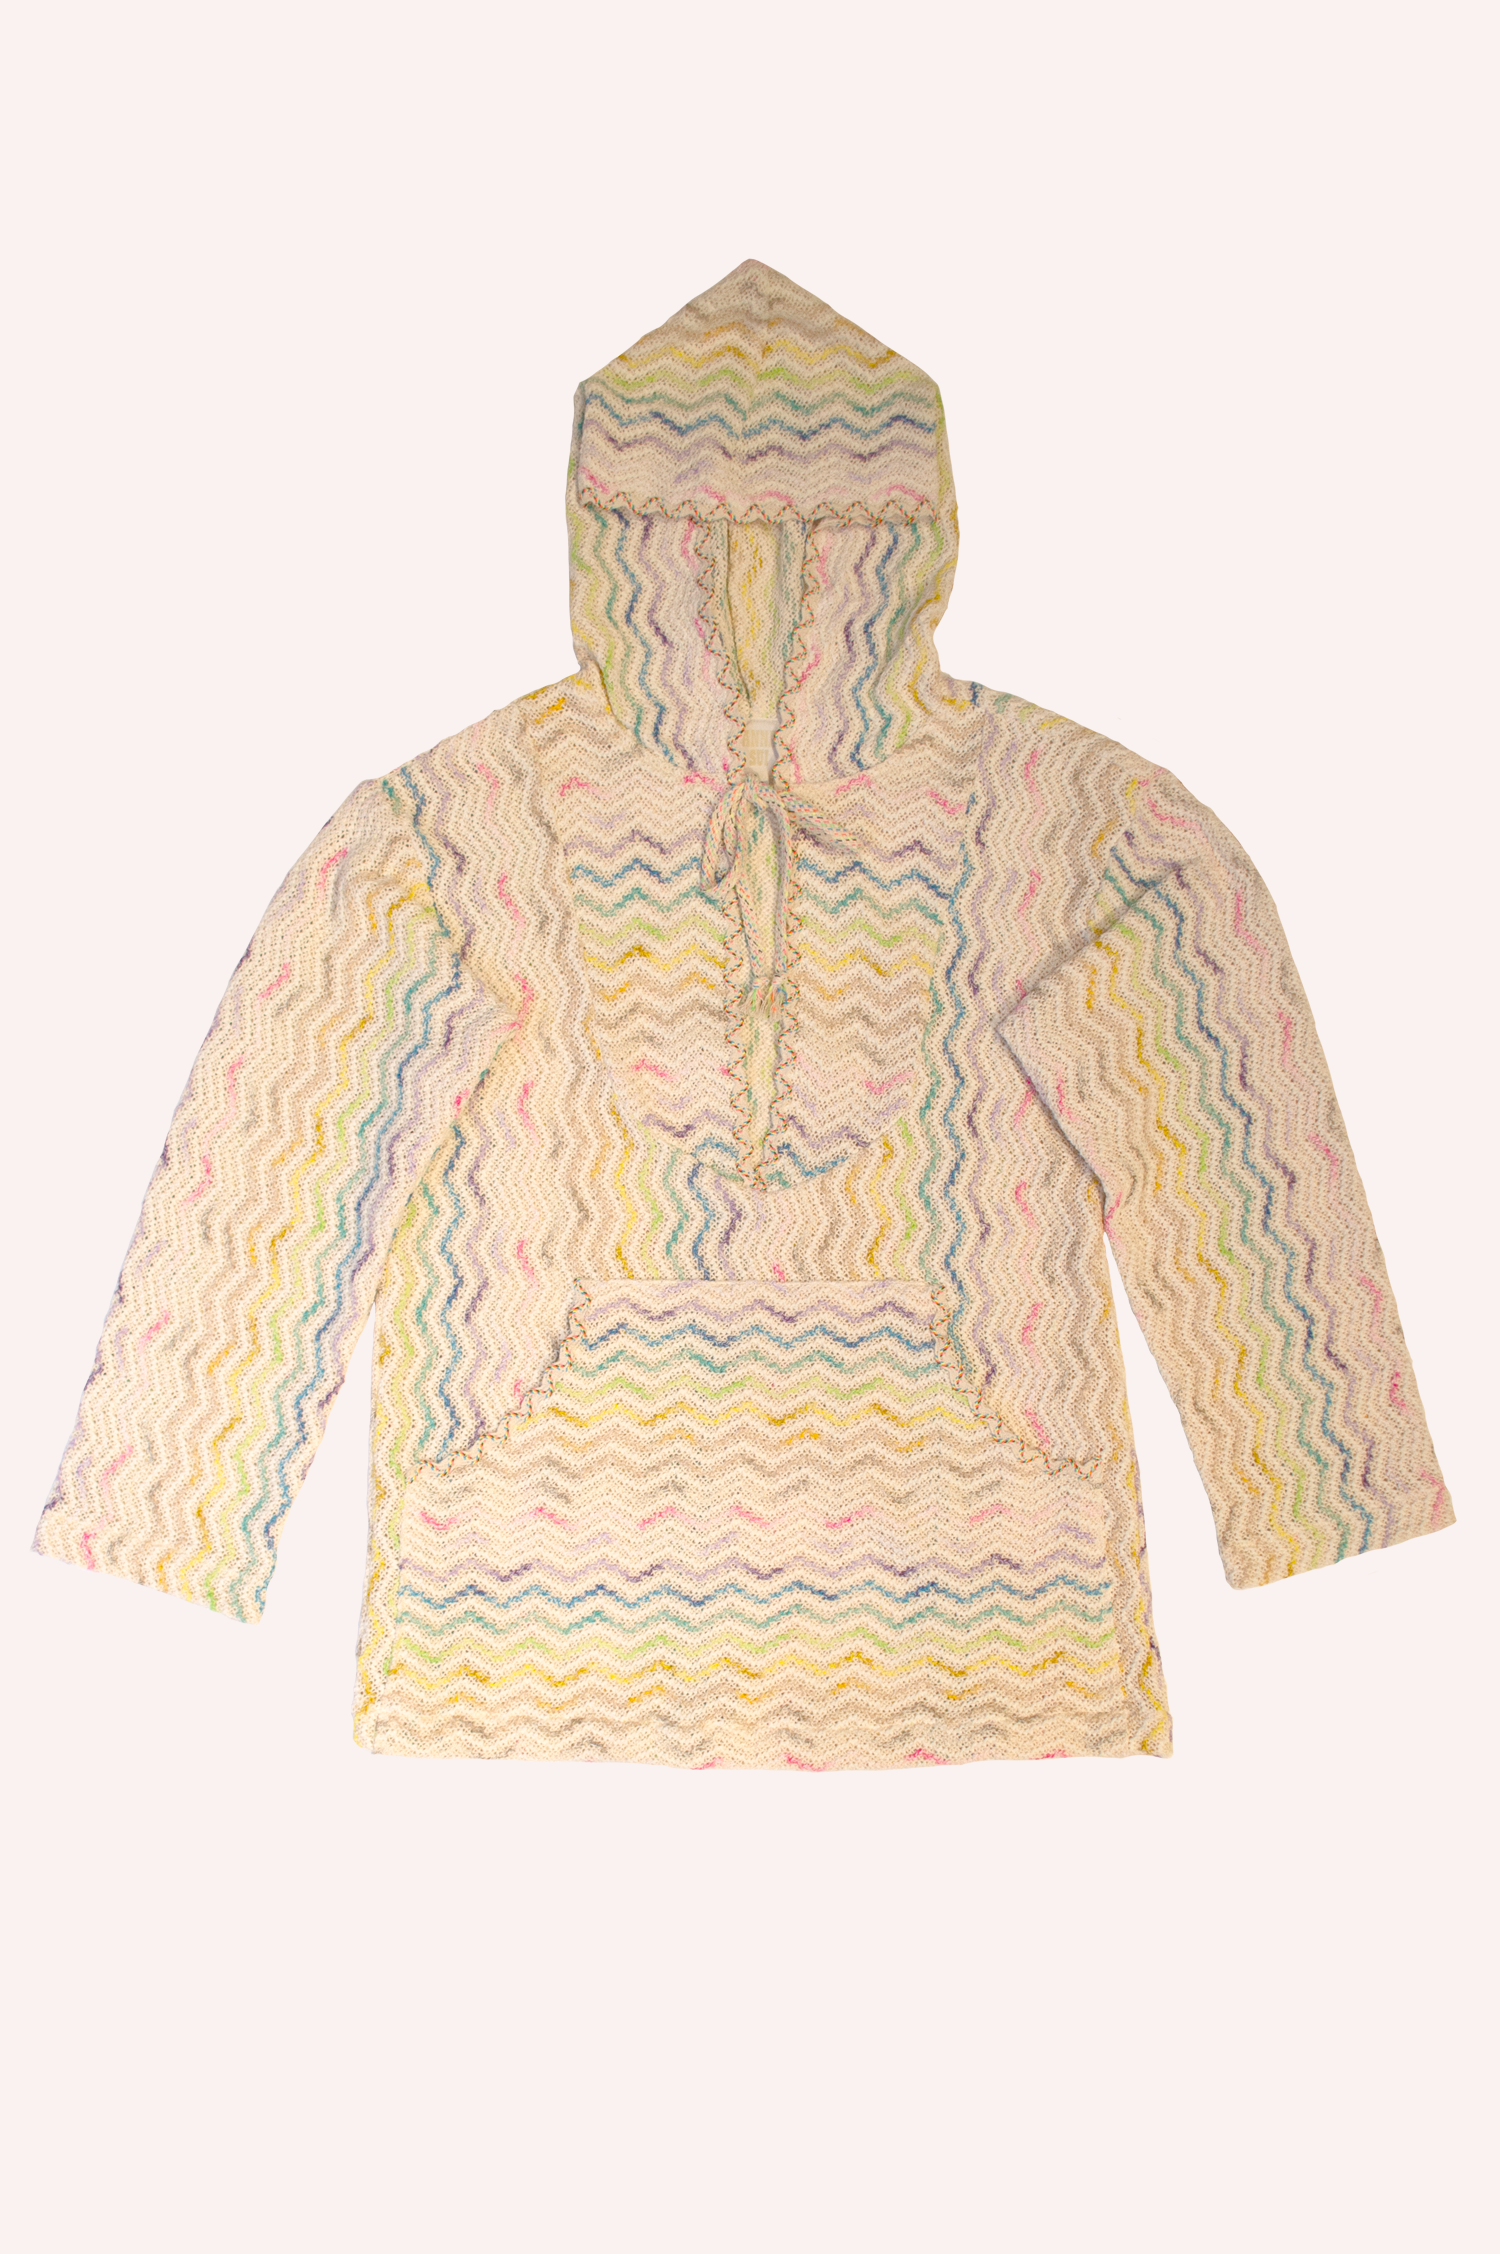 Shangri-La Knit texture Hoodie, off white with red, blue, yellow and green insert, deep collar cut with a lace, 2-pockets